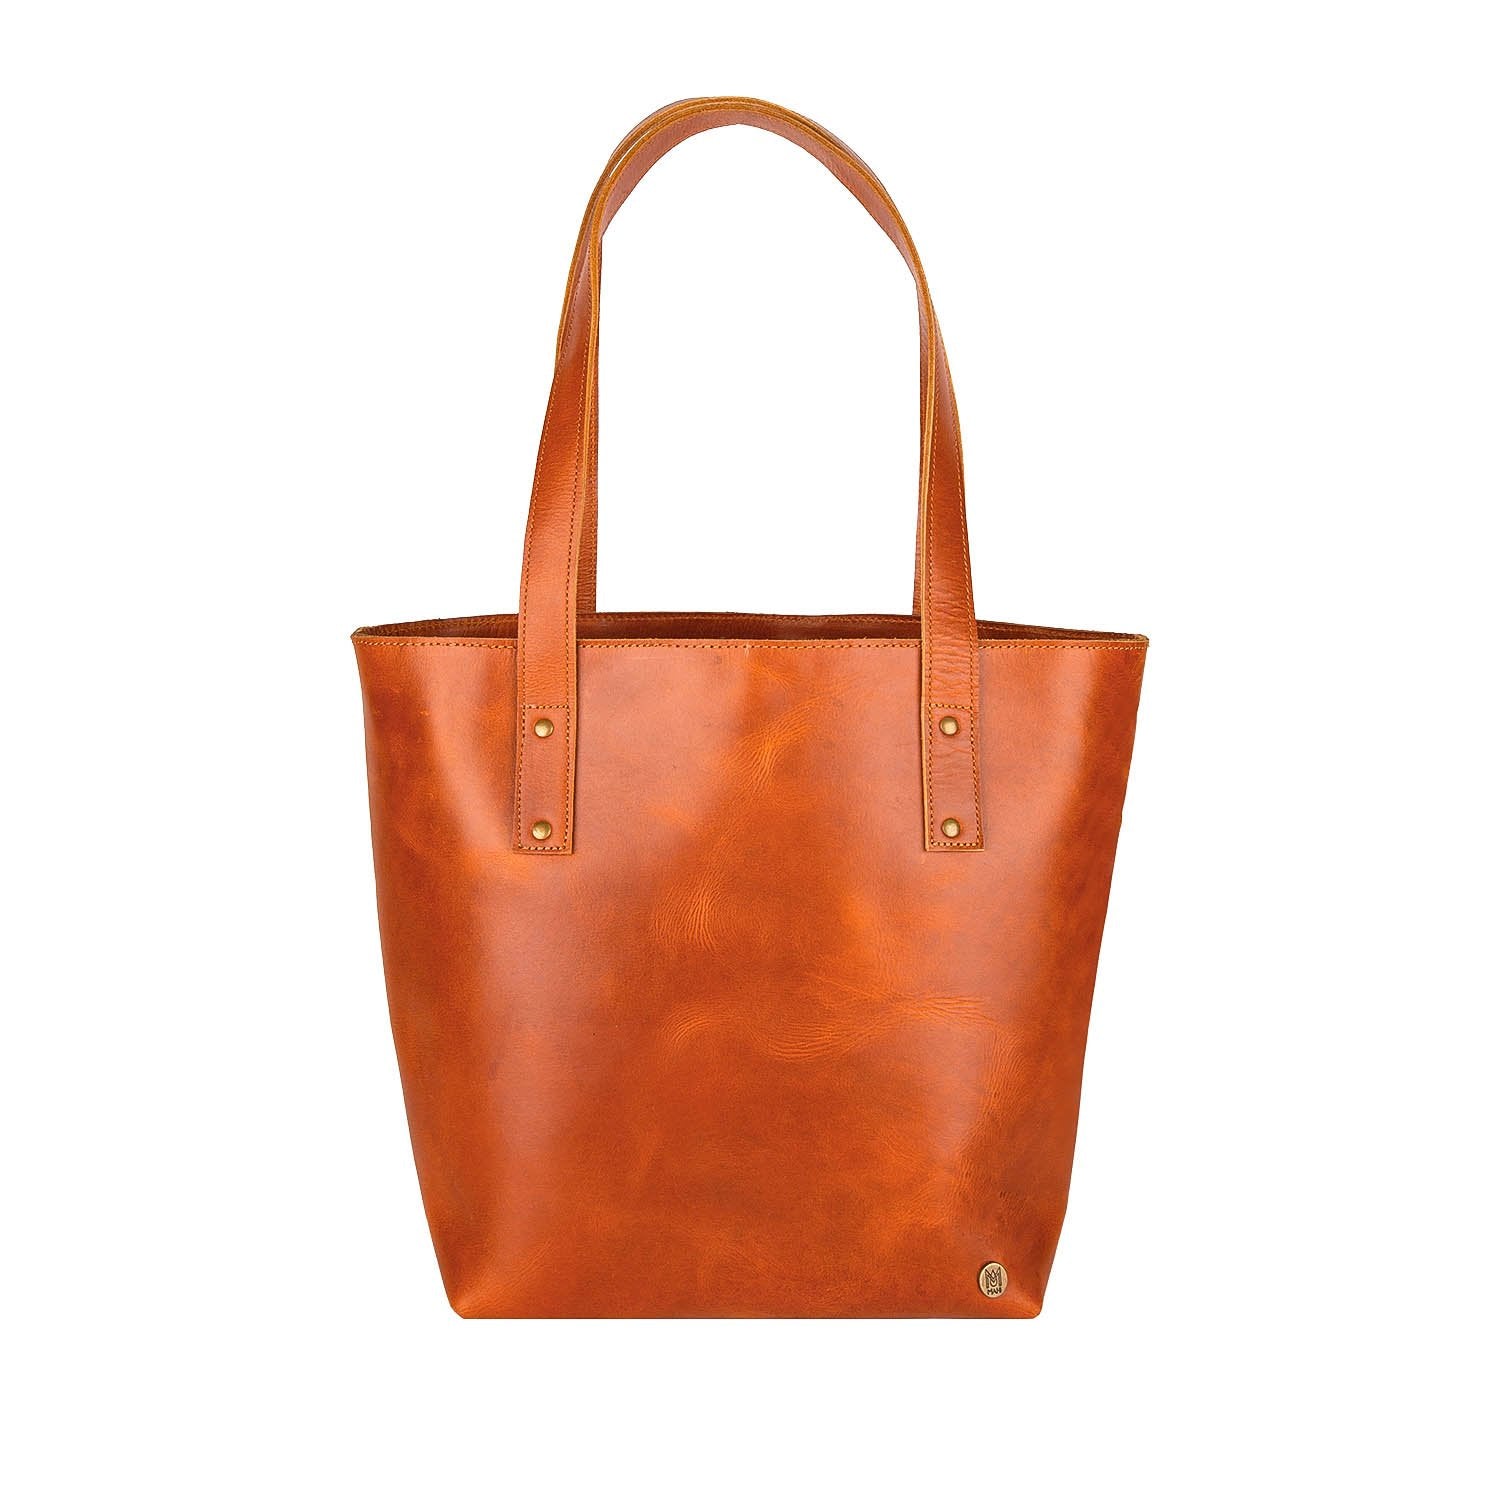 Wholesale Leather totes,Work bag,Tote bag,Brown leather tote